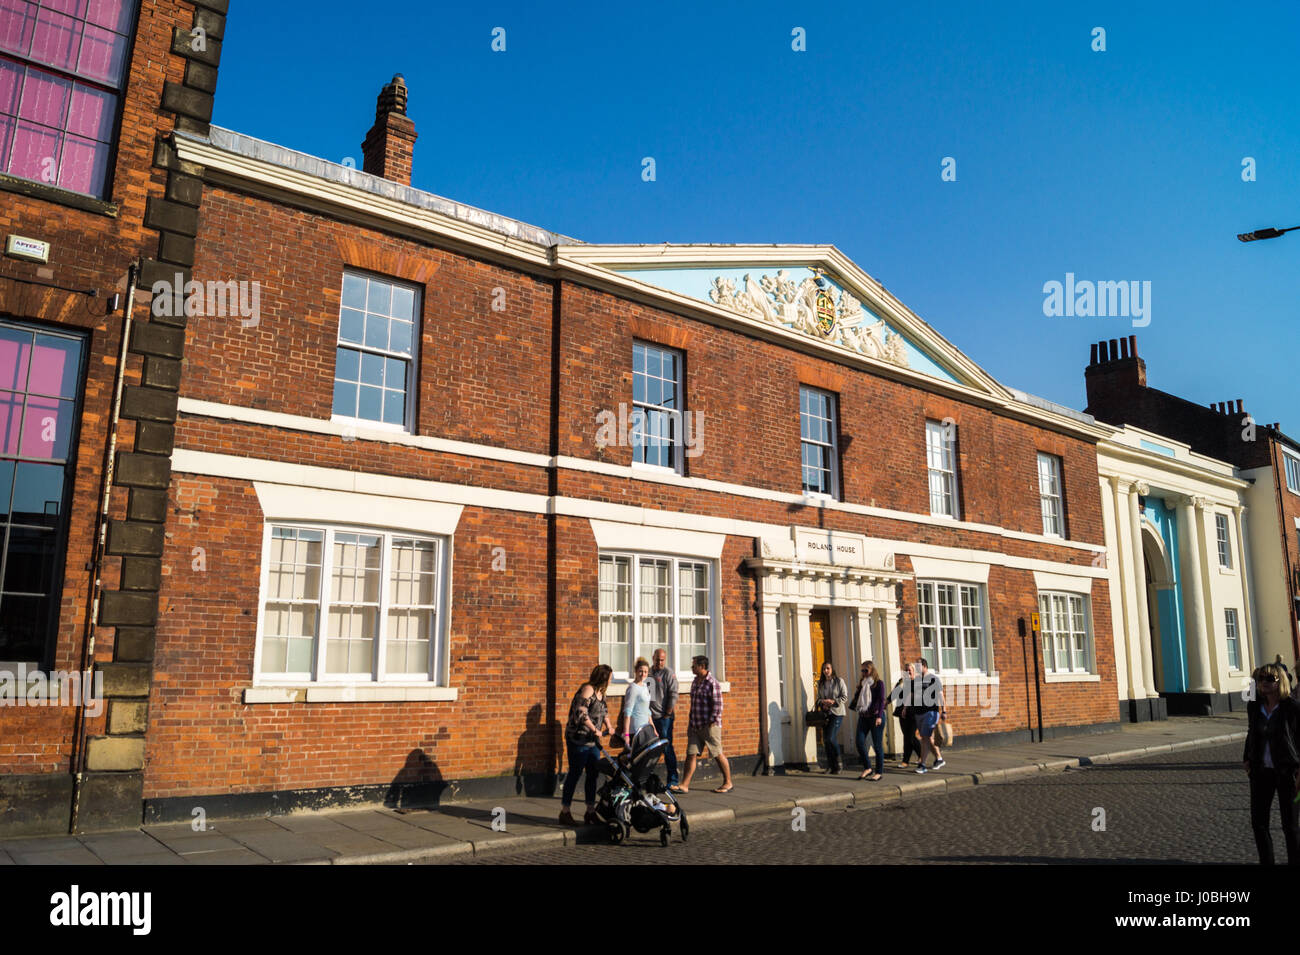 Neo-Classical Ferres Hospital almshouses by John Earle, 1922, now offices, Kingston-upon-Hull, Yorkshire, England Stock Photo